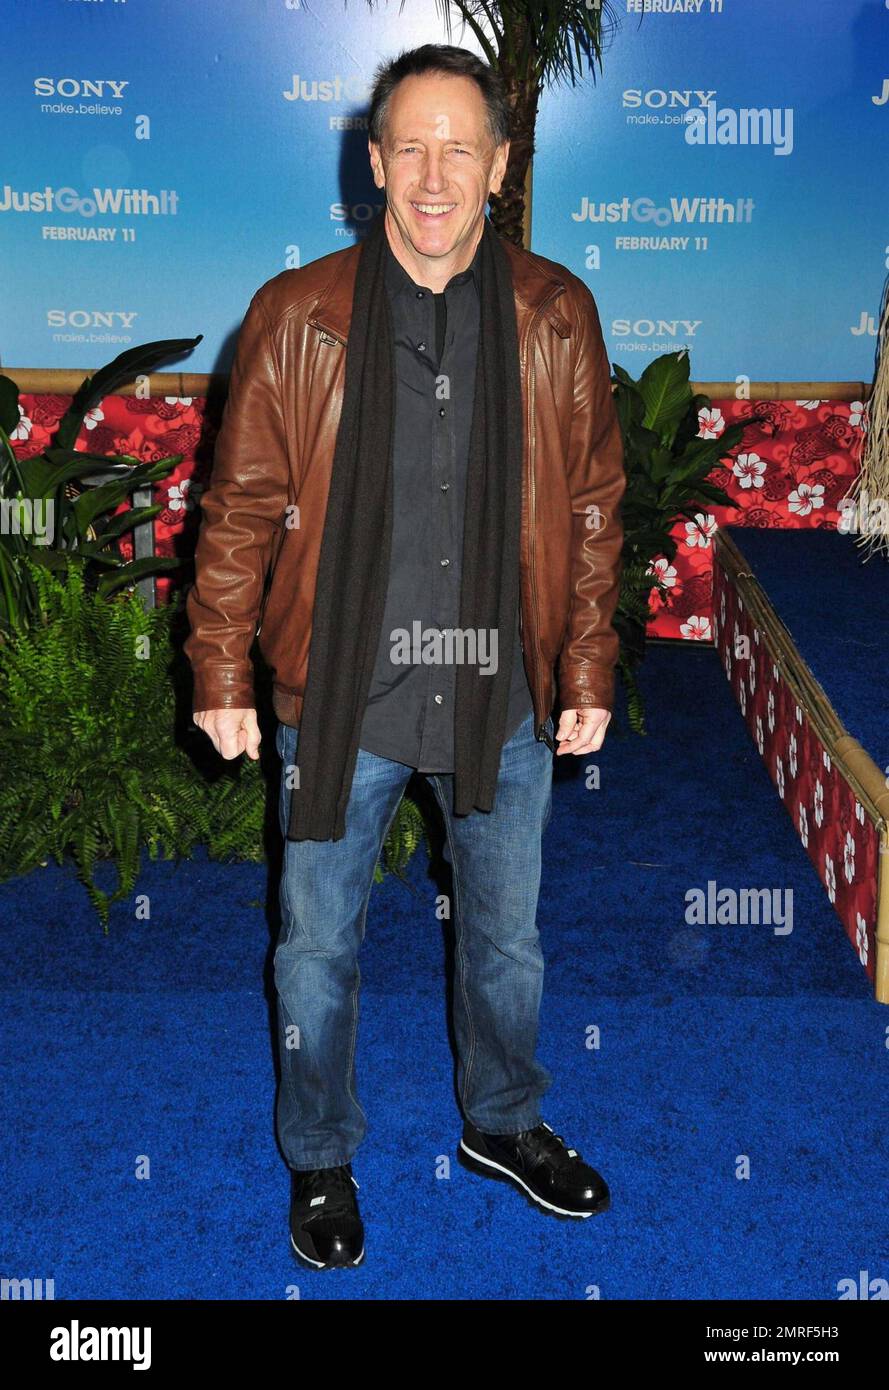 Dennis Dugan at the premiere of 'Just Go With It' at the Ziegfeld Theatre in New York, NY. 2/8/11. Stock Photo